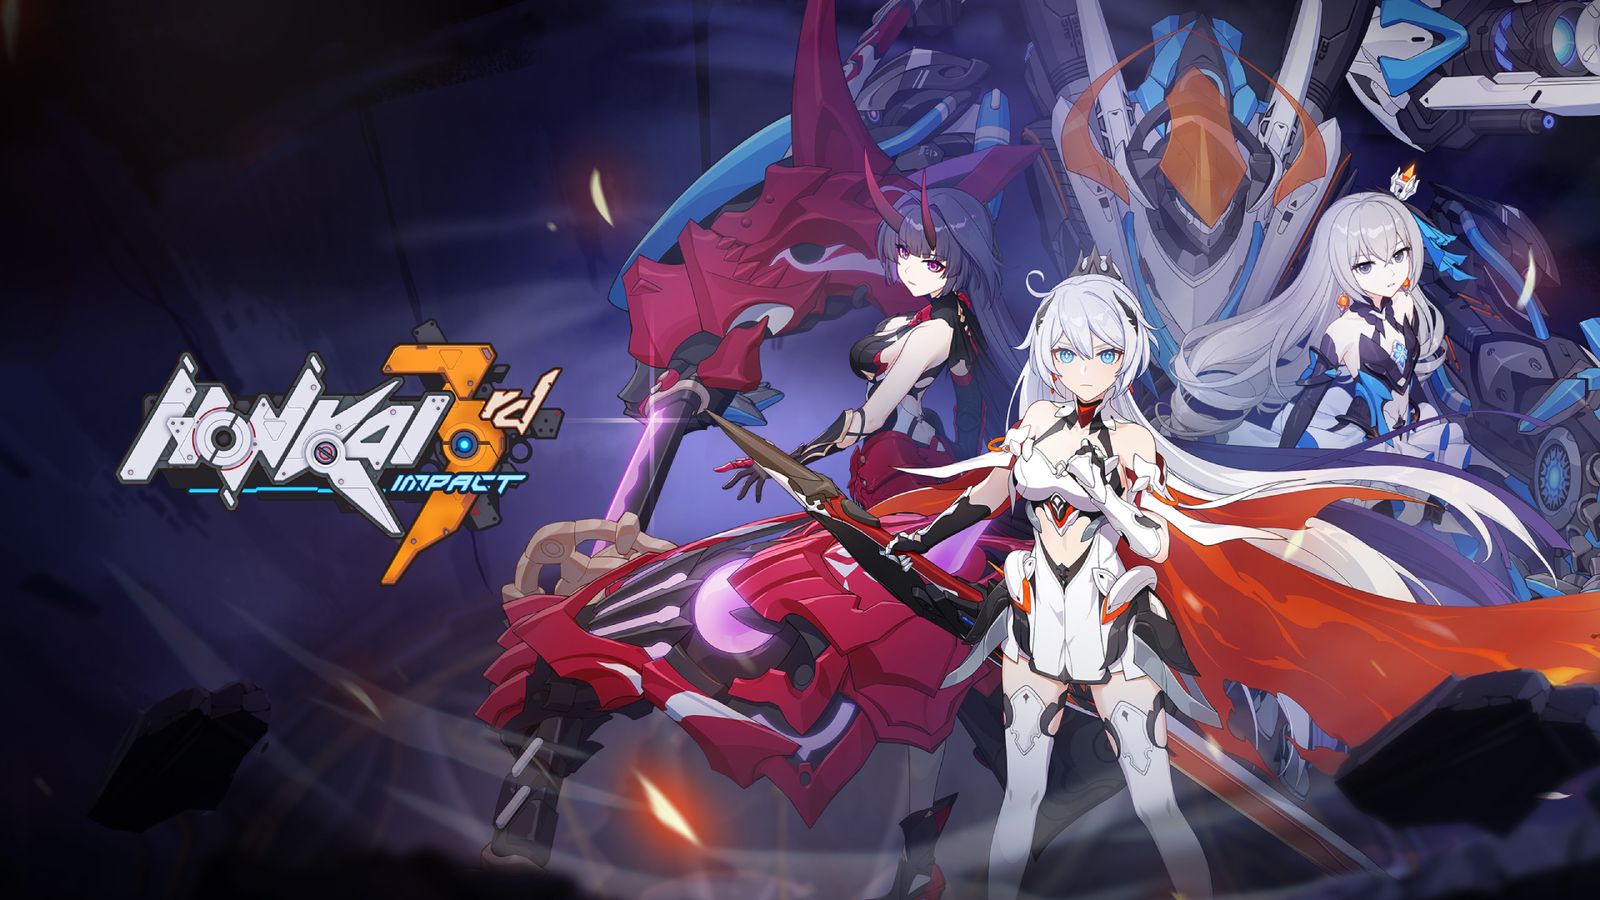 Honkai Impact 3rd cover art featuring the logo and three female characters with purple, white, and grey hair.